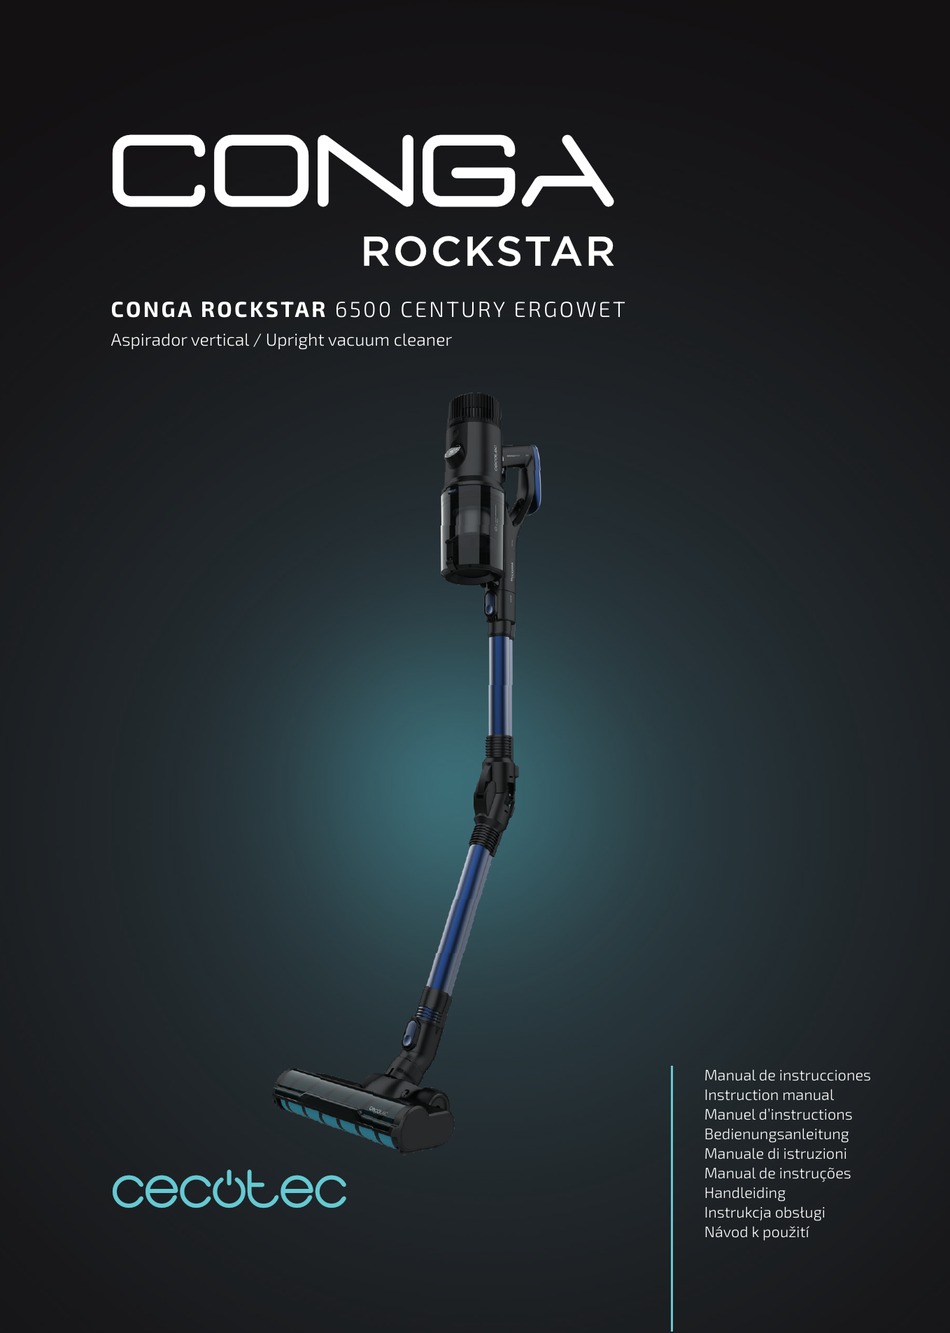 cecotec Conga Rockstar Canister Vacuum Cleaner Instruction Manual